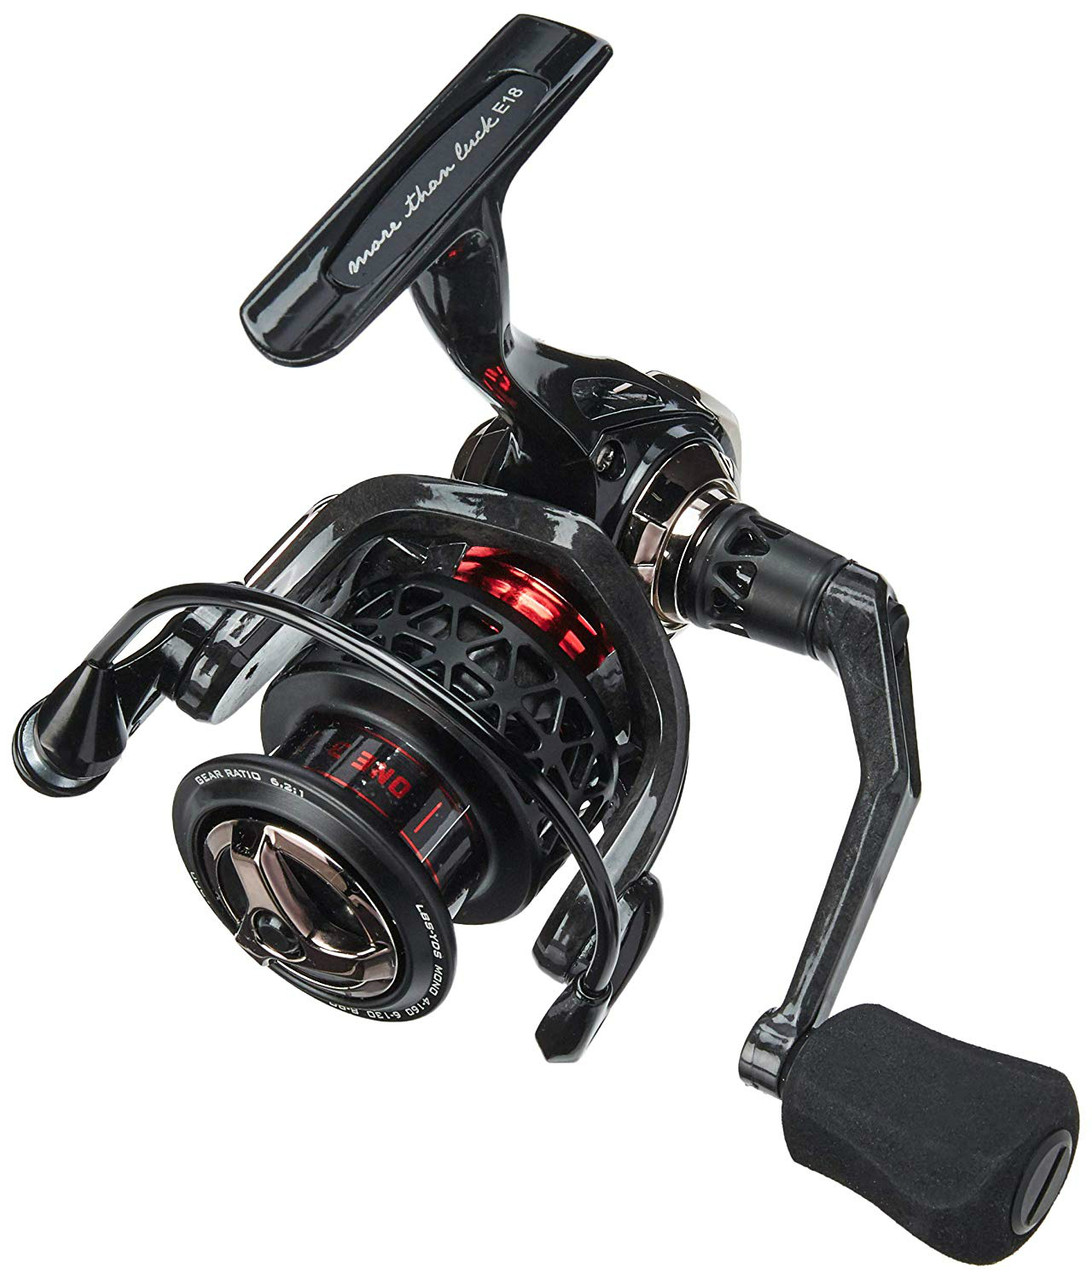 ONE3 13 Fishing Creed GT 4000 Gear Ratio 6.2:1 Spinning Fishing Reel CRGT4000 